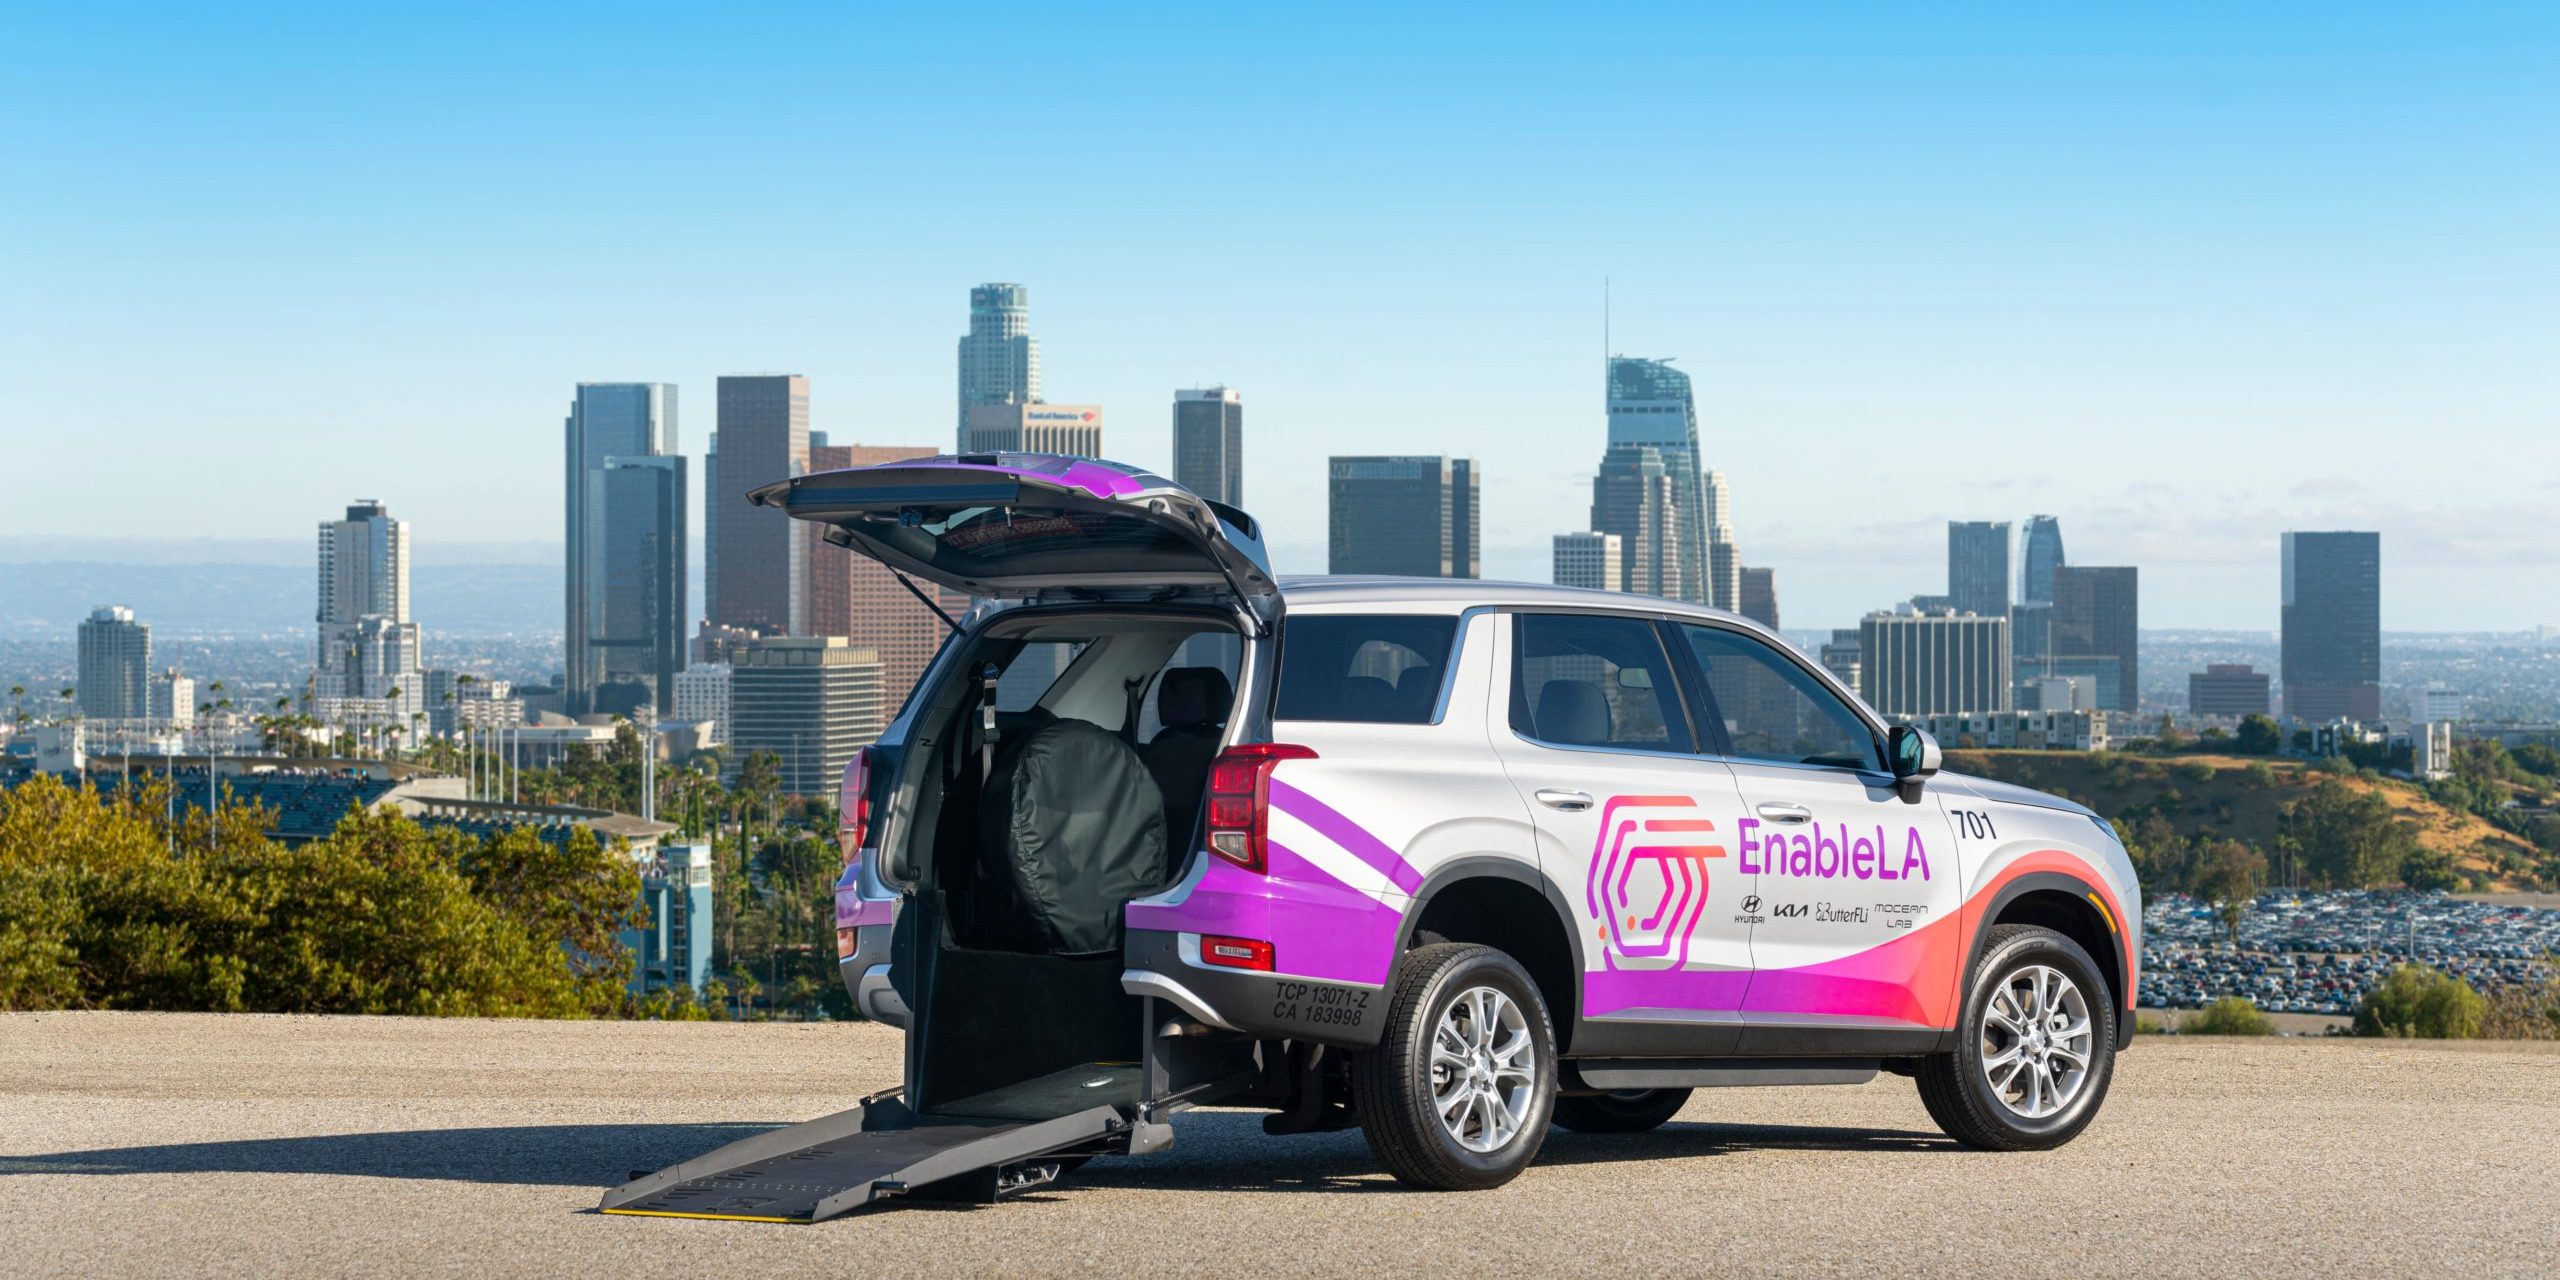 Hyundai Motor Group Launches 'EnableLA' to Assist People with Mobility Barriers in Los Angeles